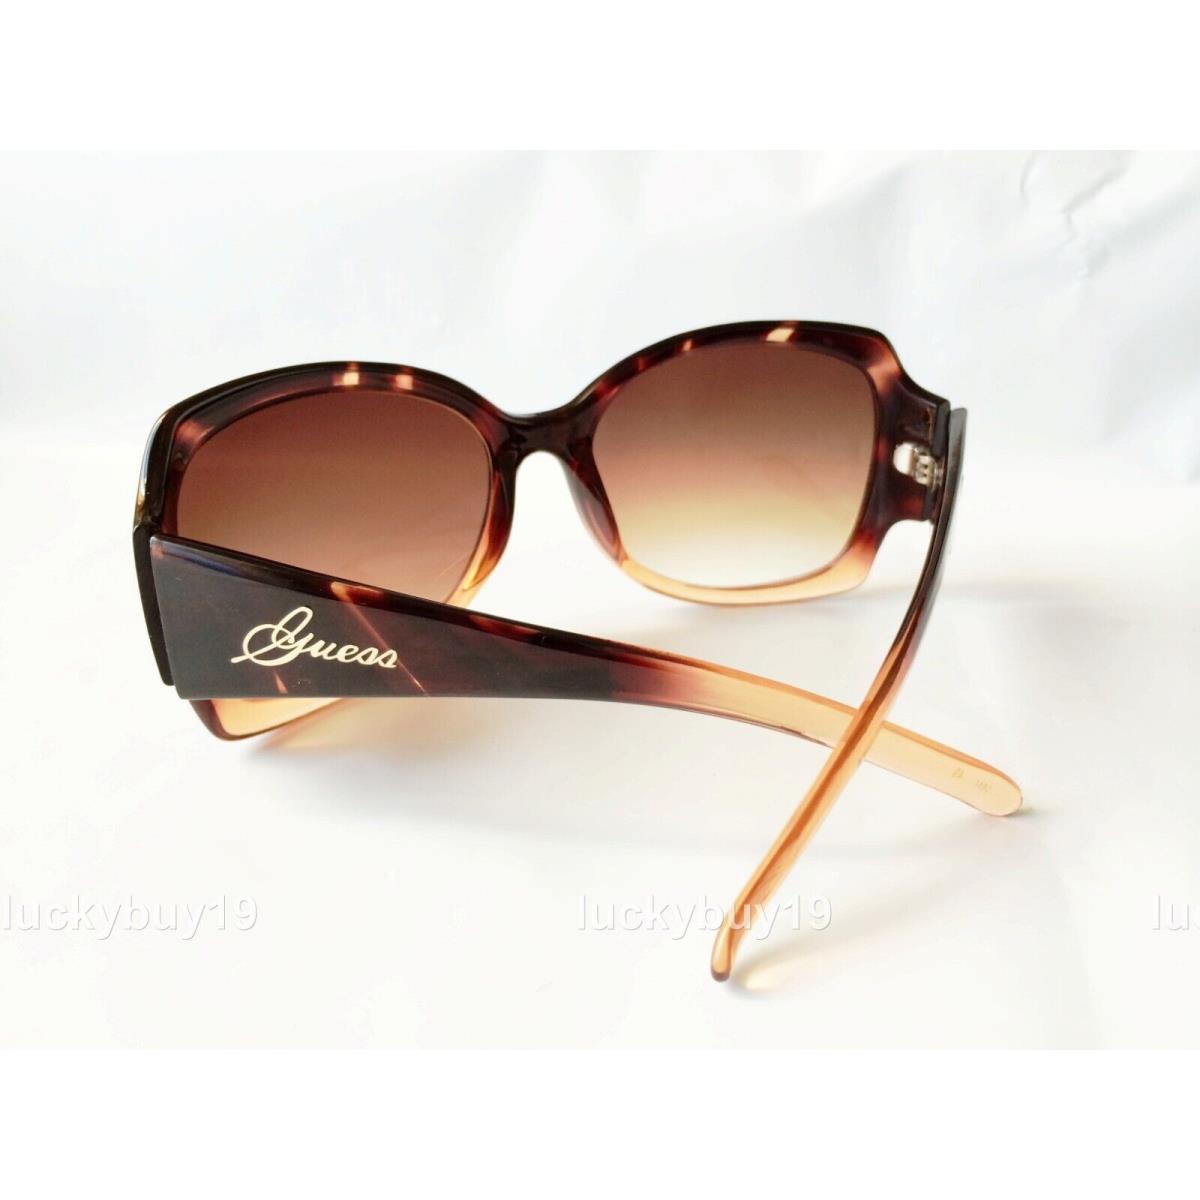 Guess sunglasses  - Brown Frame, Brown Lens 8